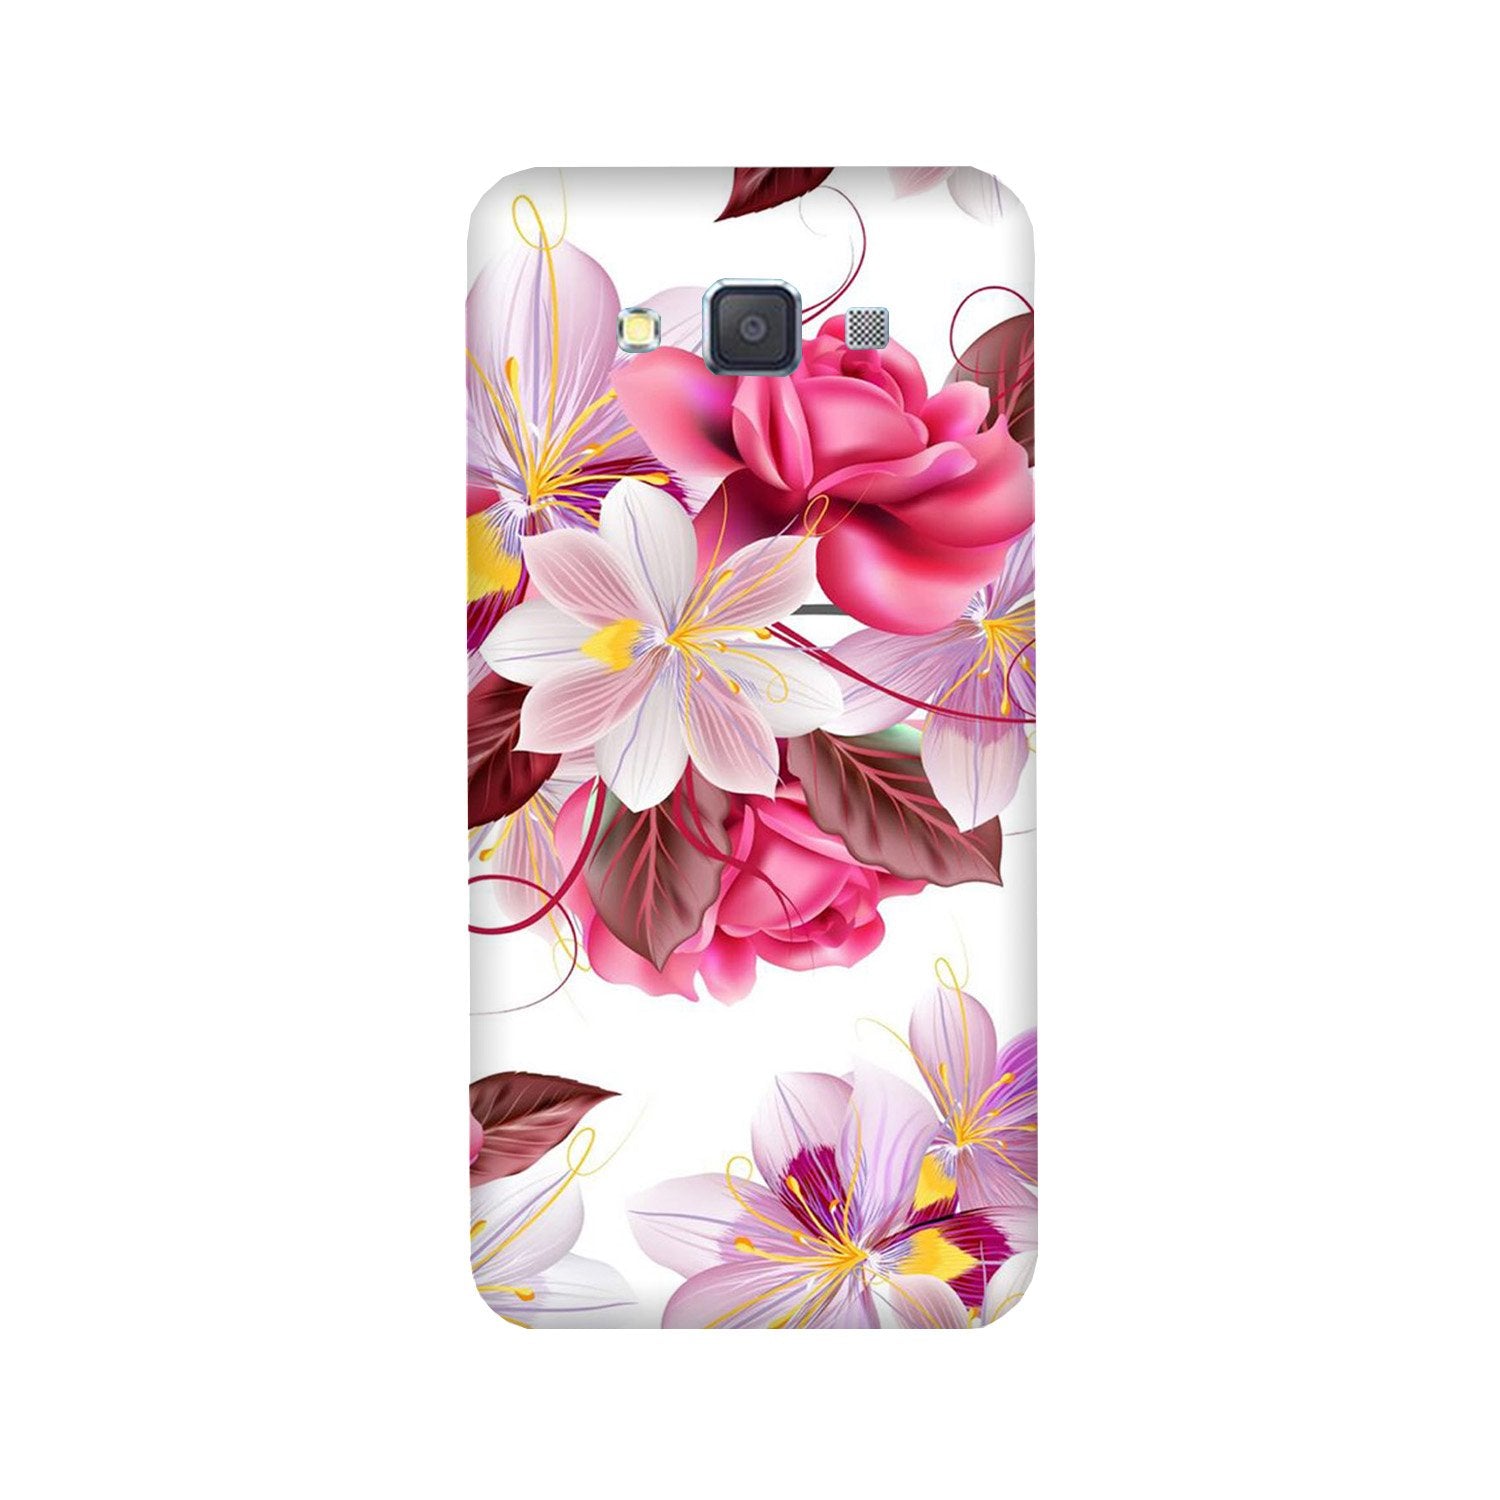 Beautiful flowers Case for Galaxy Grand 2